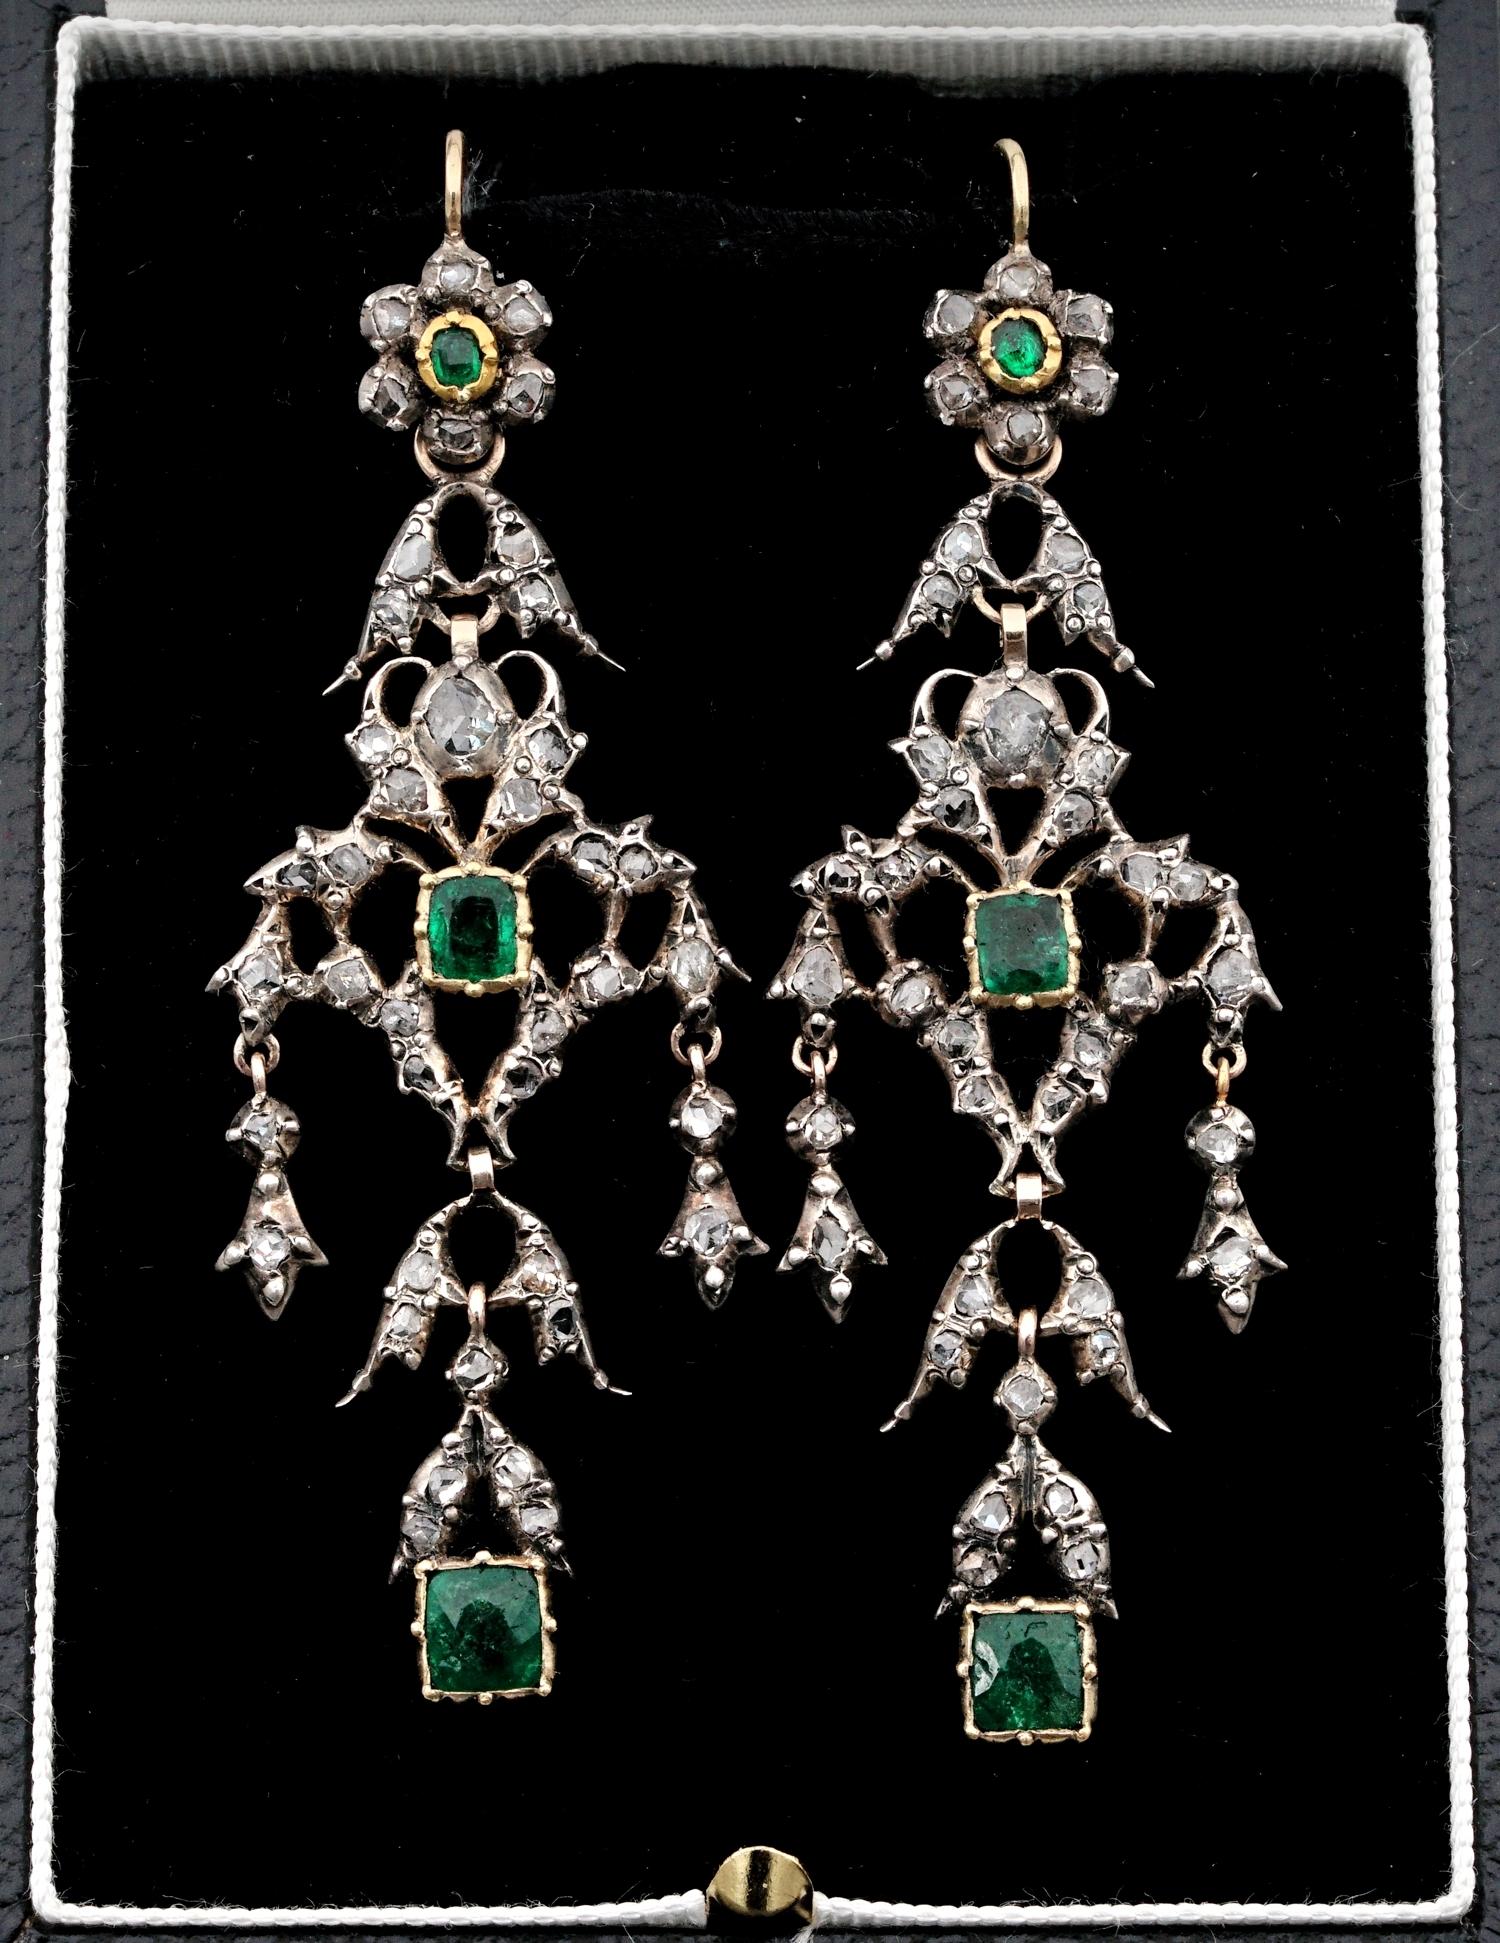 The Importance of Earrings

Jewellery from the Georgian period is considered extremely rare as it is a survival from a bygone era
Earrings indeed take centre stage day or evening wear, complementing changes of hair style or dress for the